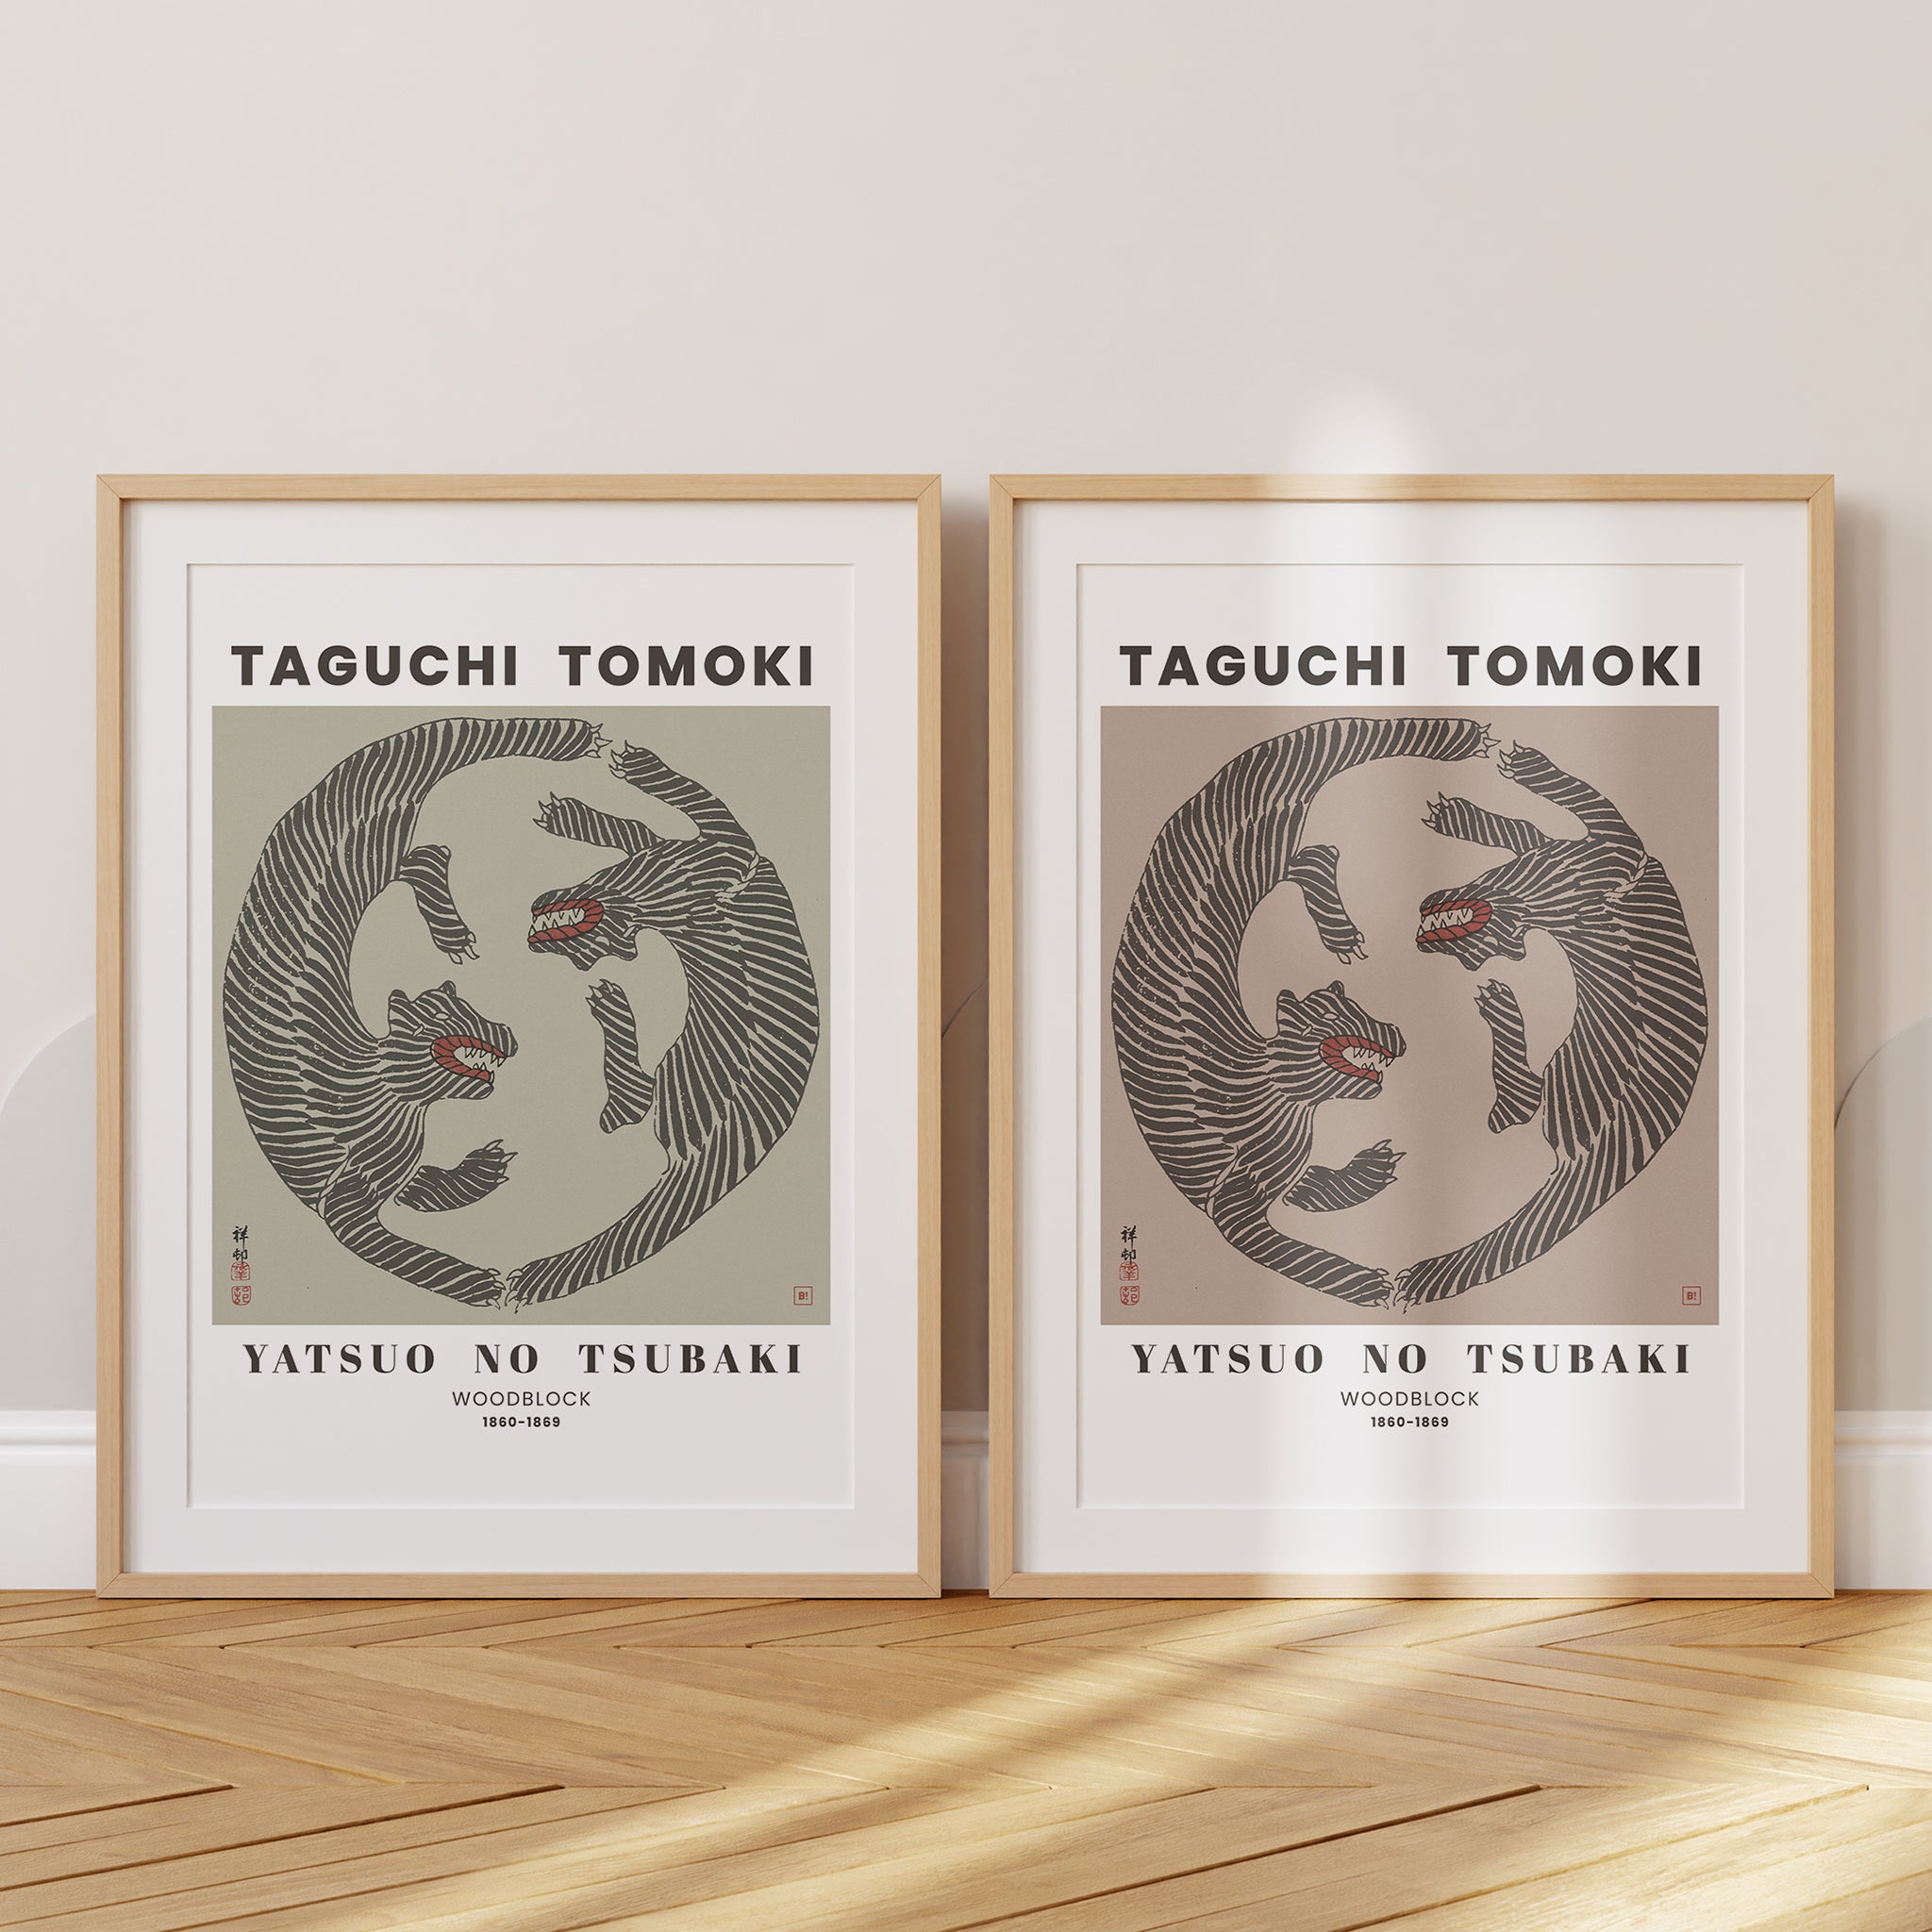 Be inspired by our remastered Taguchi Tomoki Woodblock Tigers Terracotta exhibition art print. This artwork was printed using the giclée process on archival acid-free paper and is presented in a set of two oak frames with passe-partout that captures its timeless beauty in every detail.